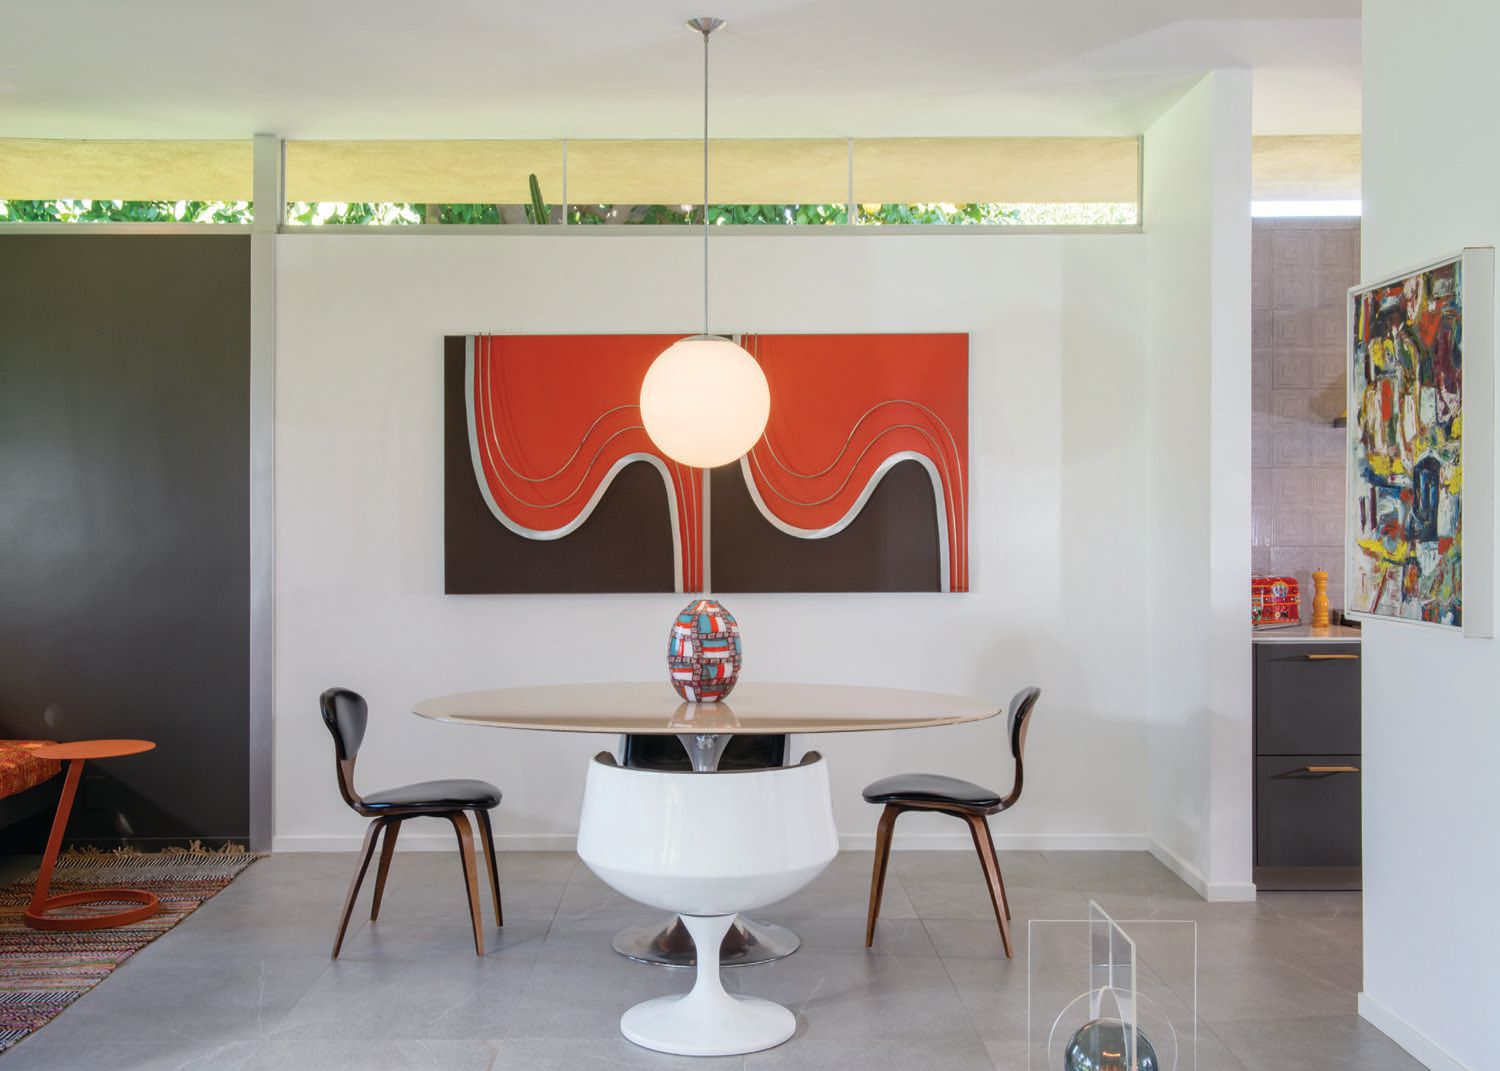 A Burke tulip dining table base—topped with a custom resin oval top by Ulloo 42—is surrounded by vintage chairs. The pendant and Curtis Jeré wall sculptures are also vintage PHOTOGRAPHED BY DAN CHAVKIN